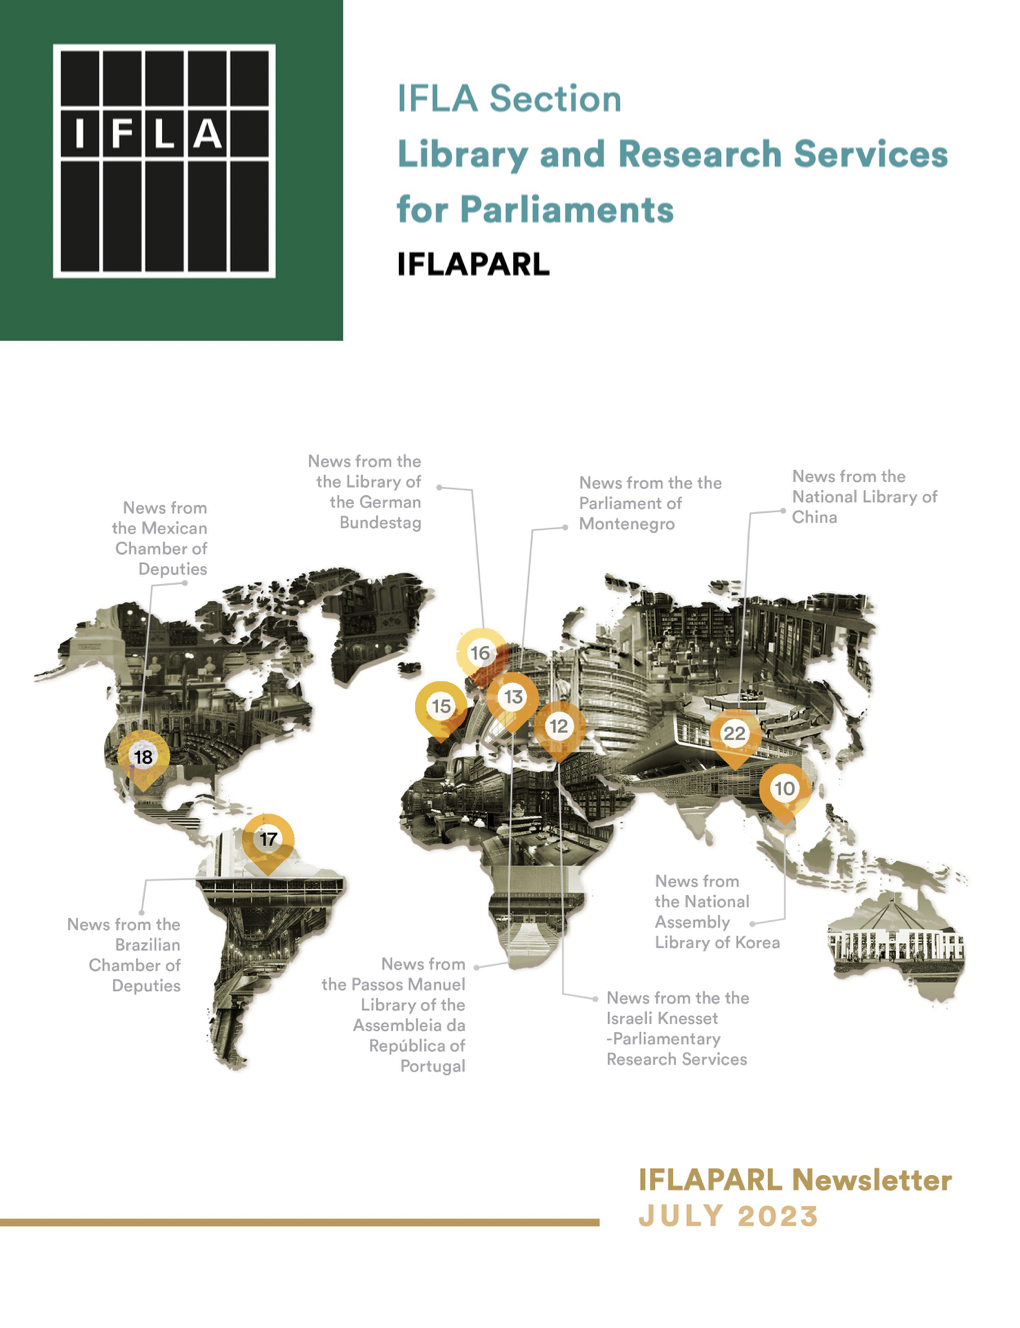 Newsletter: Library and Research Services for Parliaments Section, July 2023